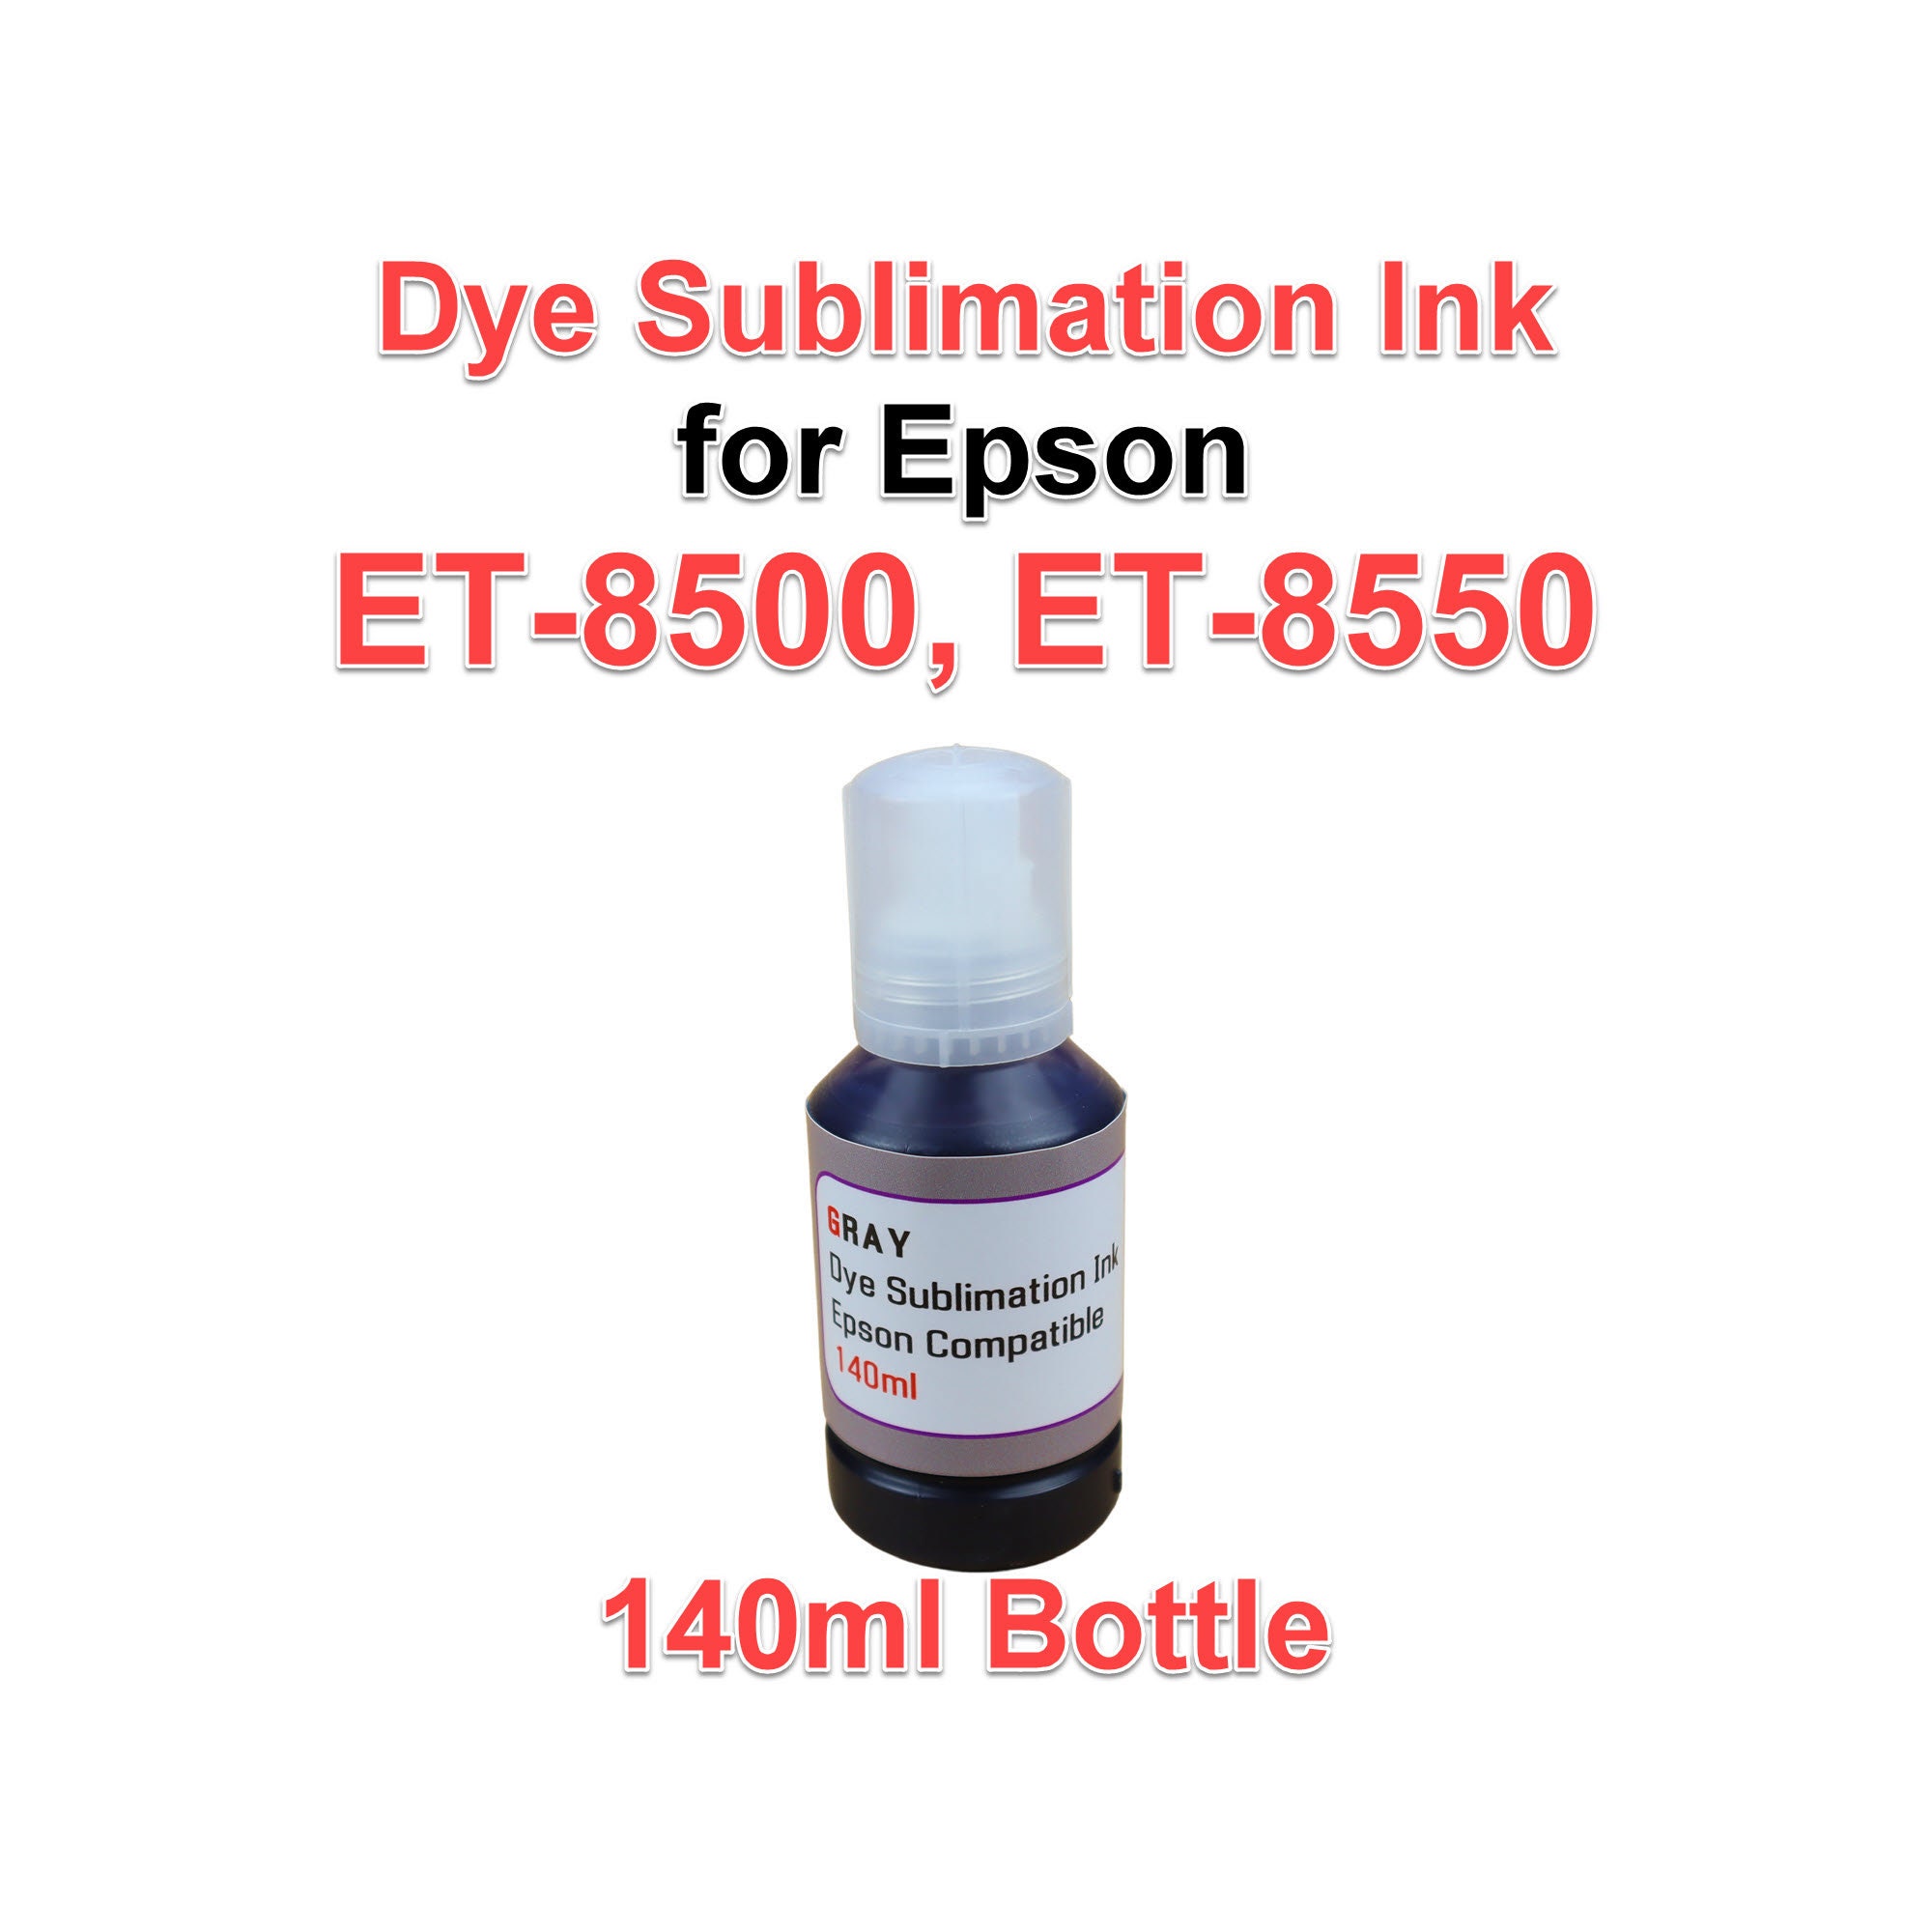 How To Setup Epson ET-8550 and ET-8500 for Sublimation (Part 1) EP:19 